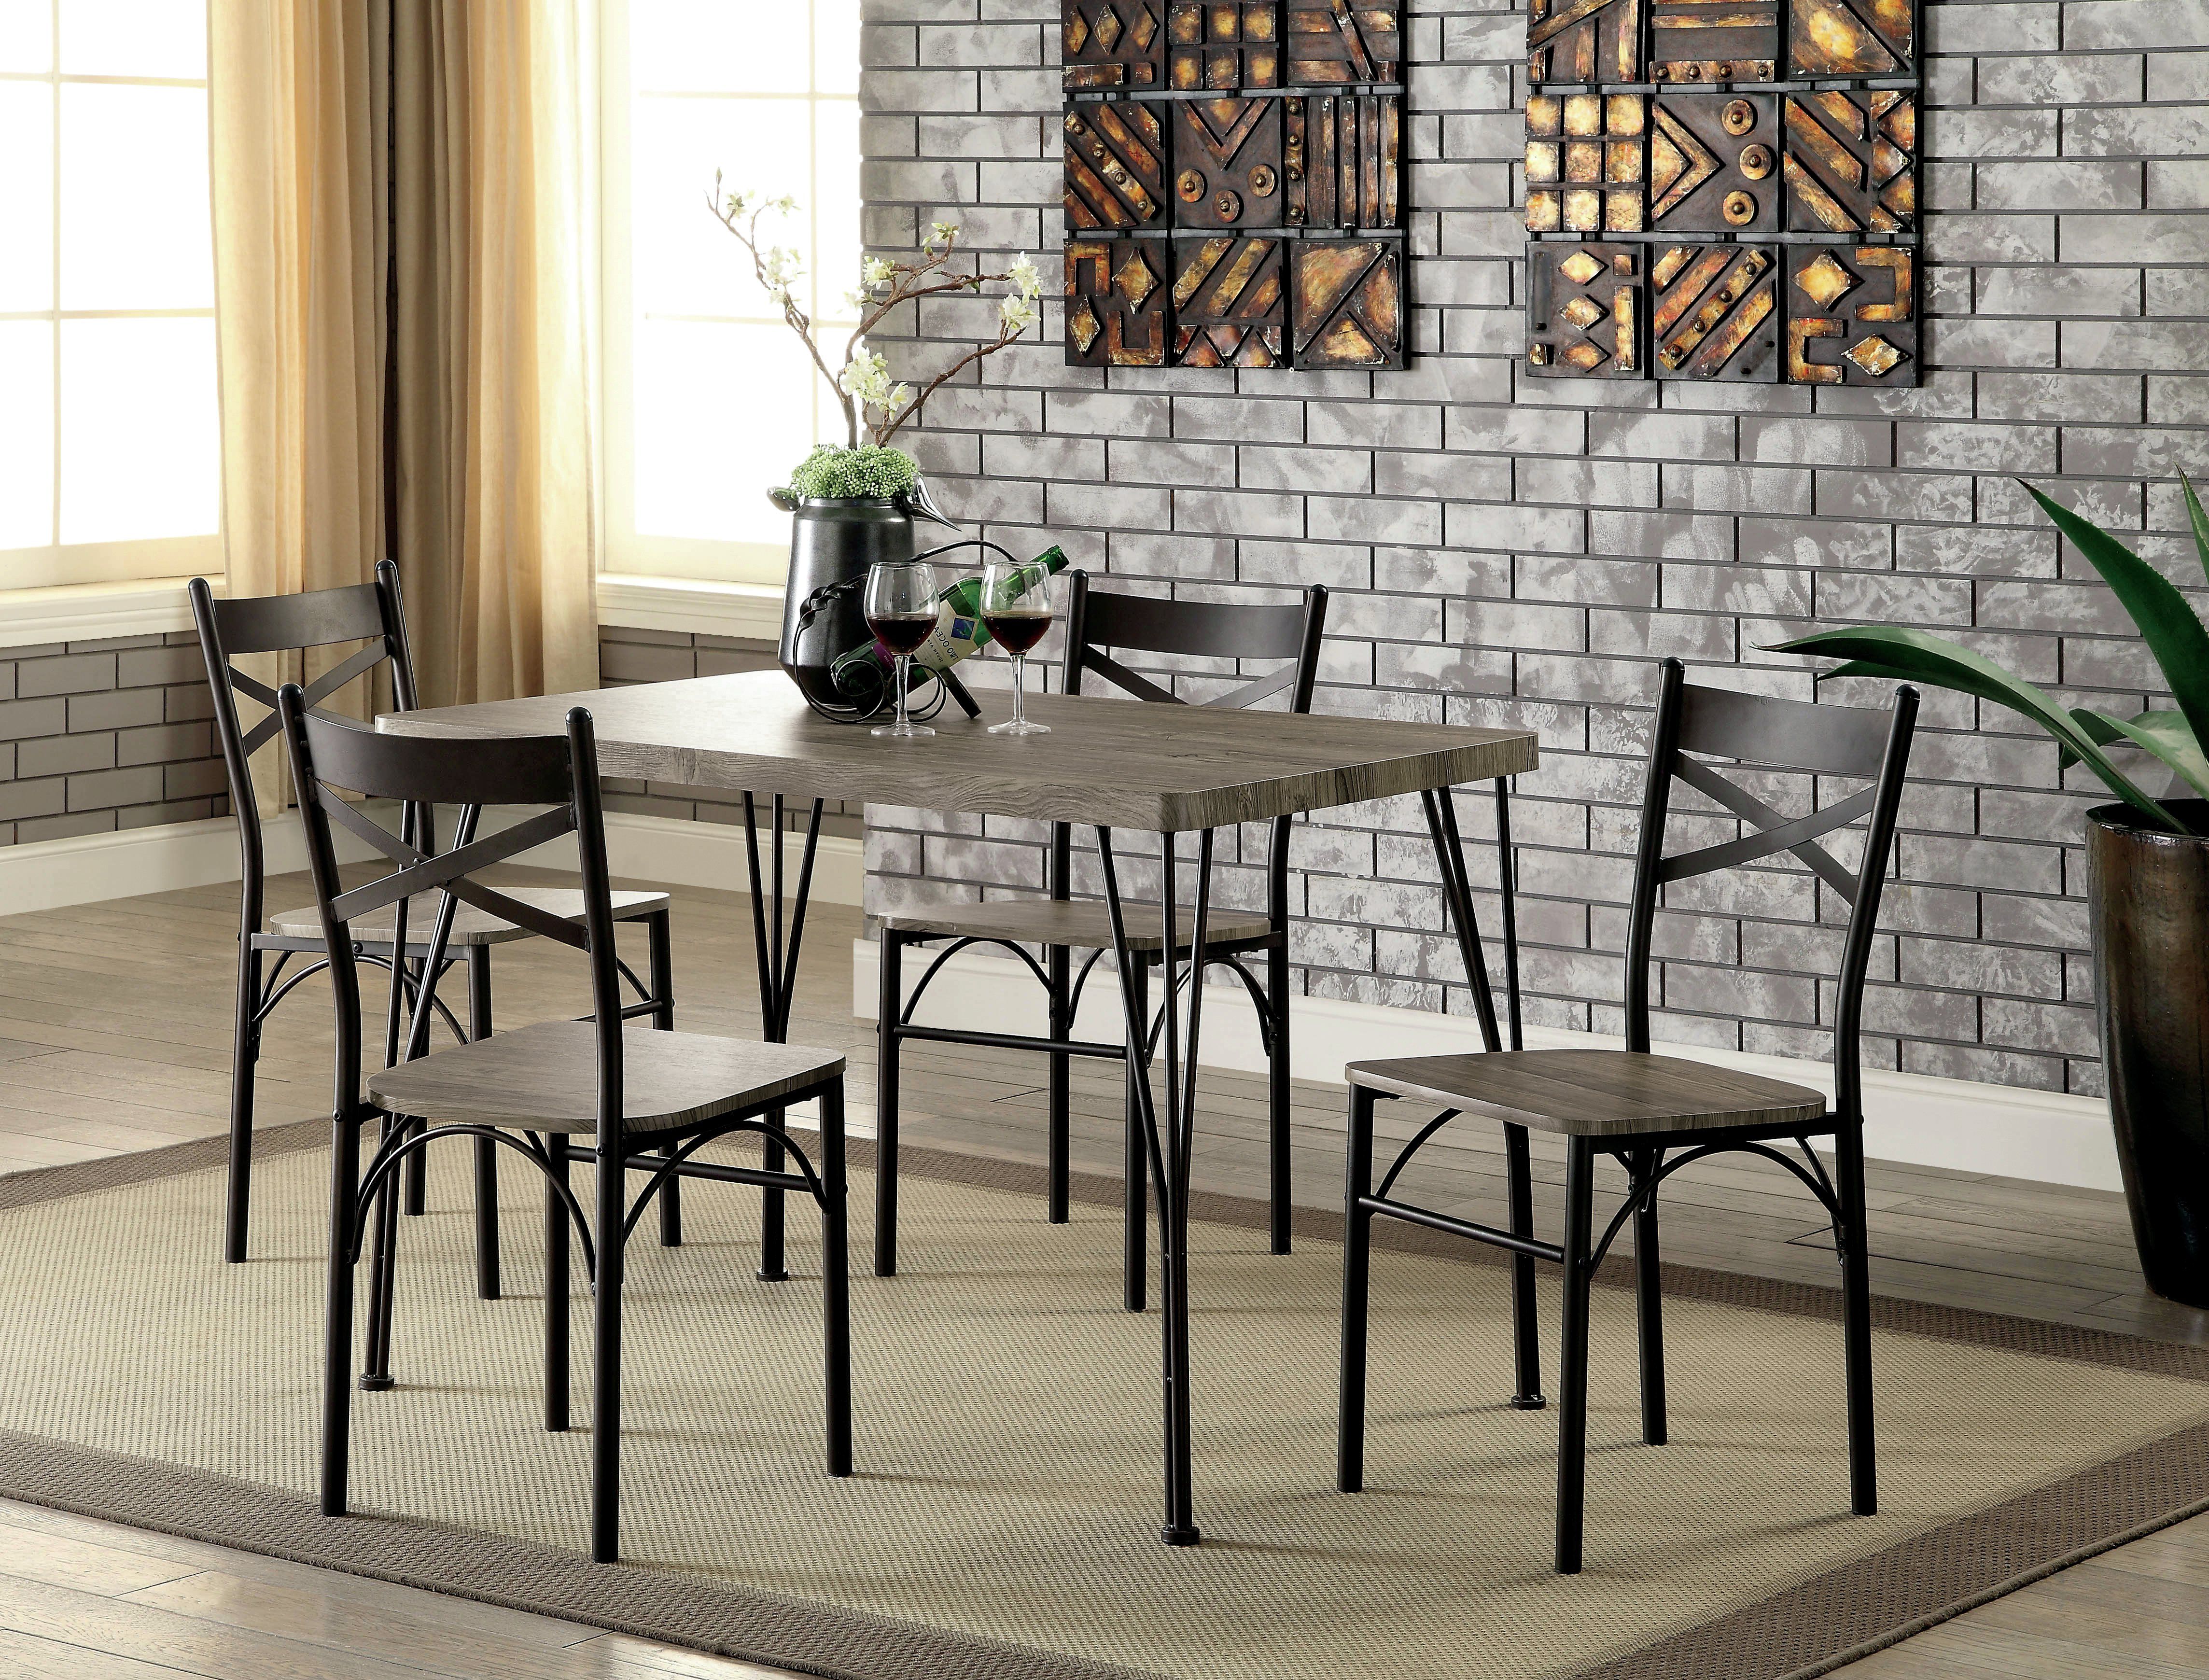 Kieffer 5 Piece Dining Sets In Best And Newest Middleport 5 Piece Dining Set (View 13 of 20)